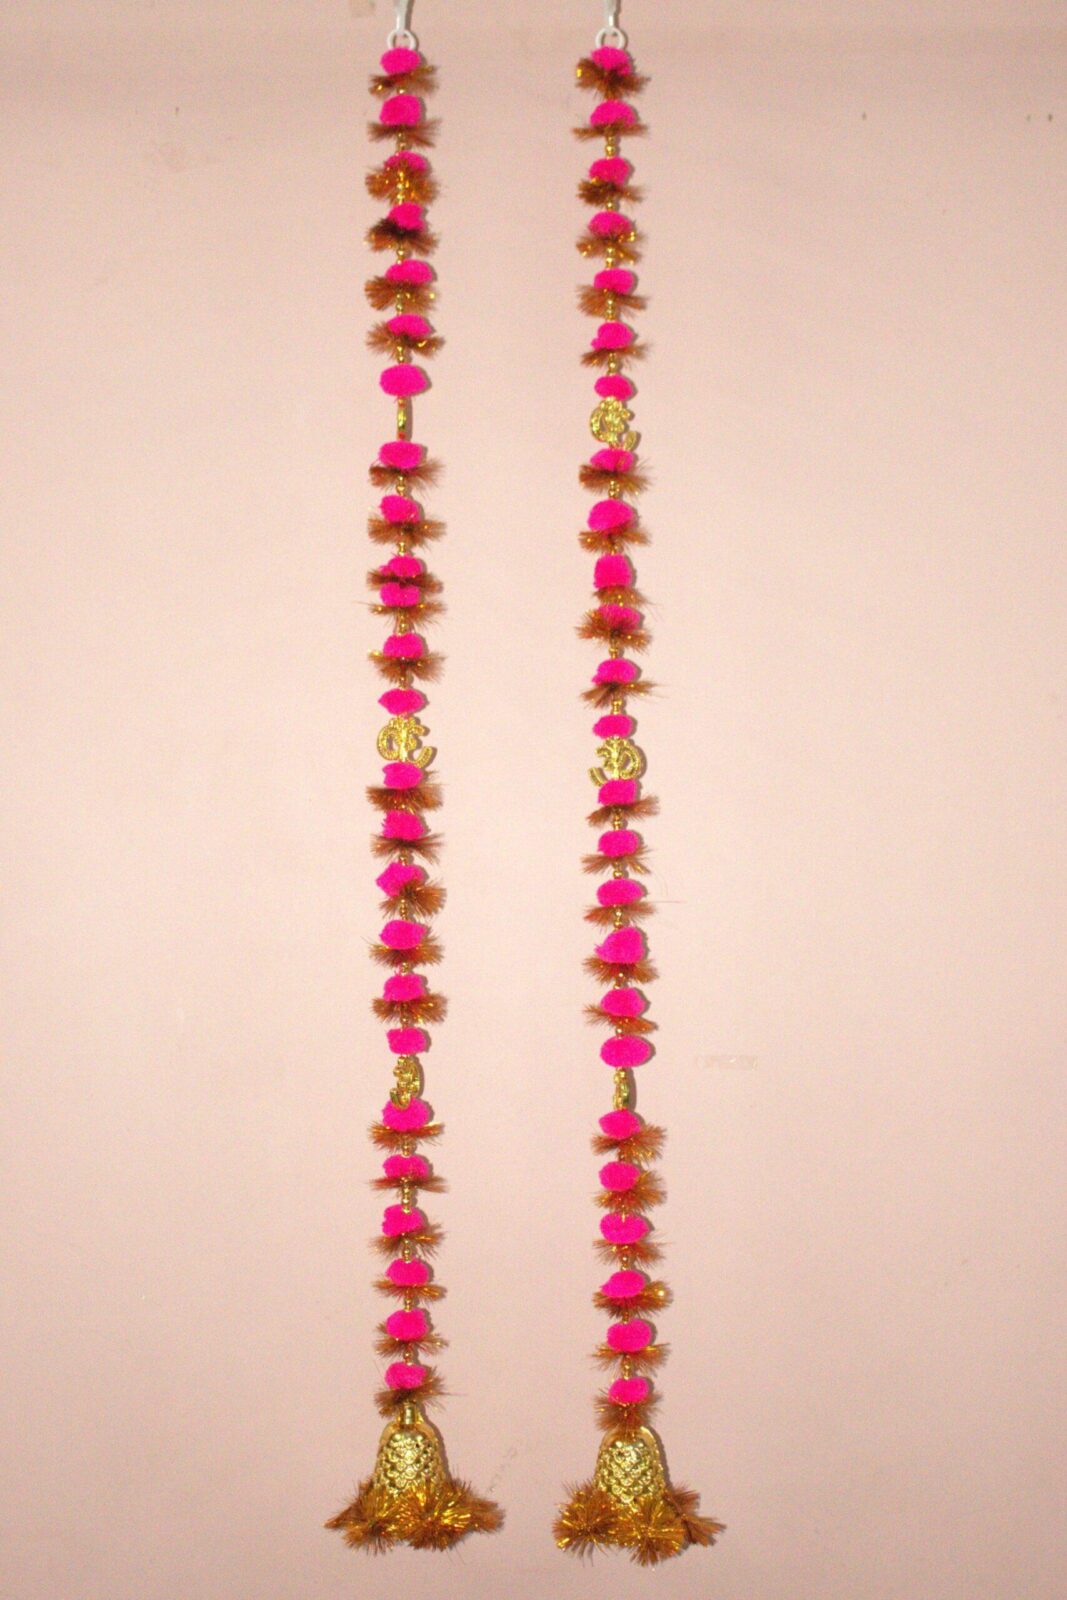 Pink Color PomPom Door Hanging / Wall hangings / Latkans for Decoration Approx 5 ft- Pack of 2 Strings with Golden Hanging Bells